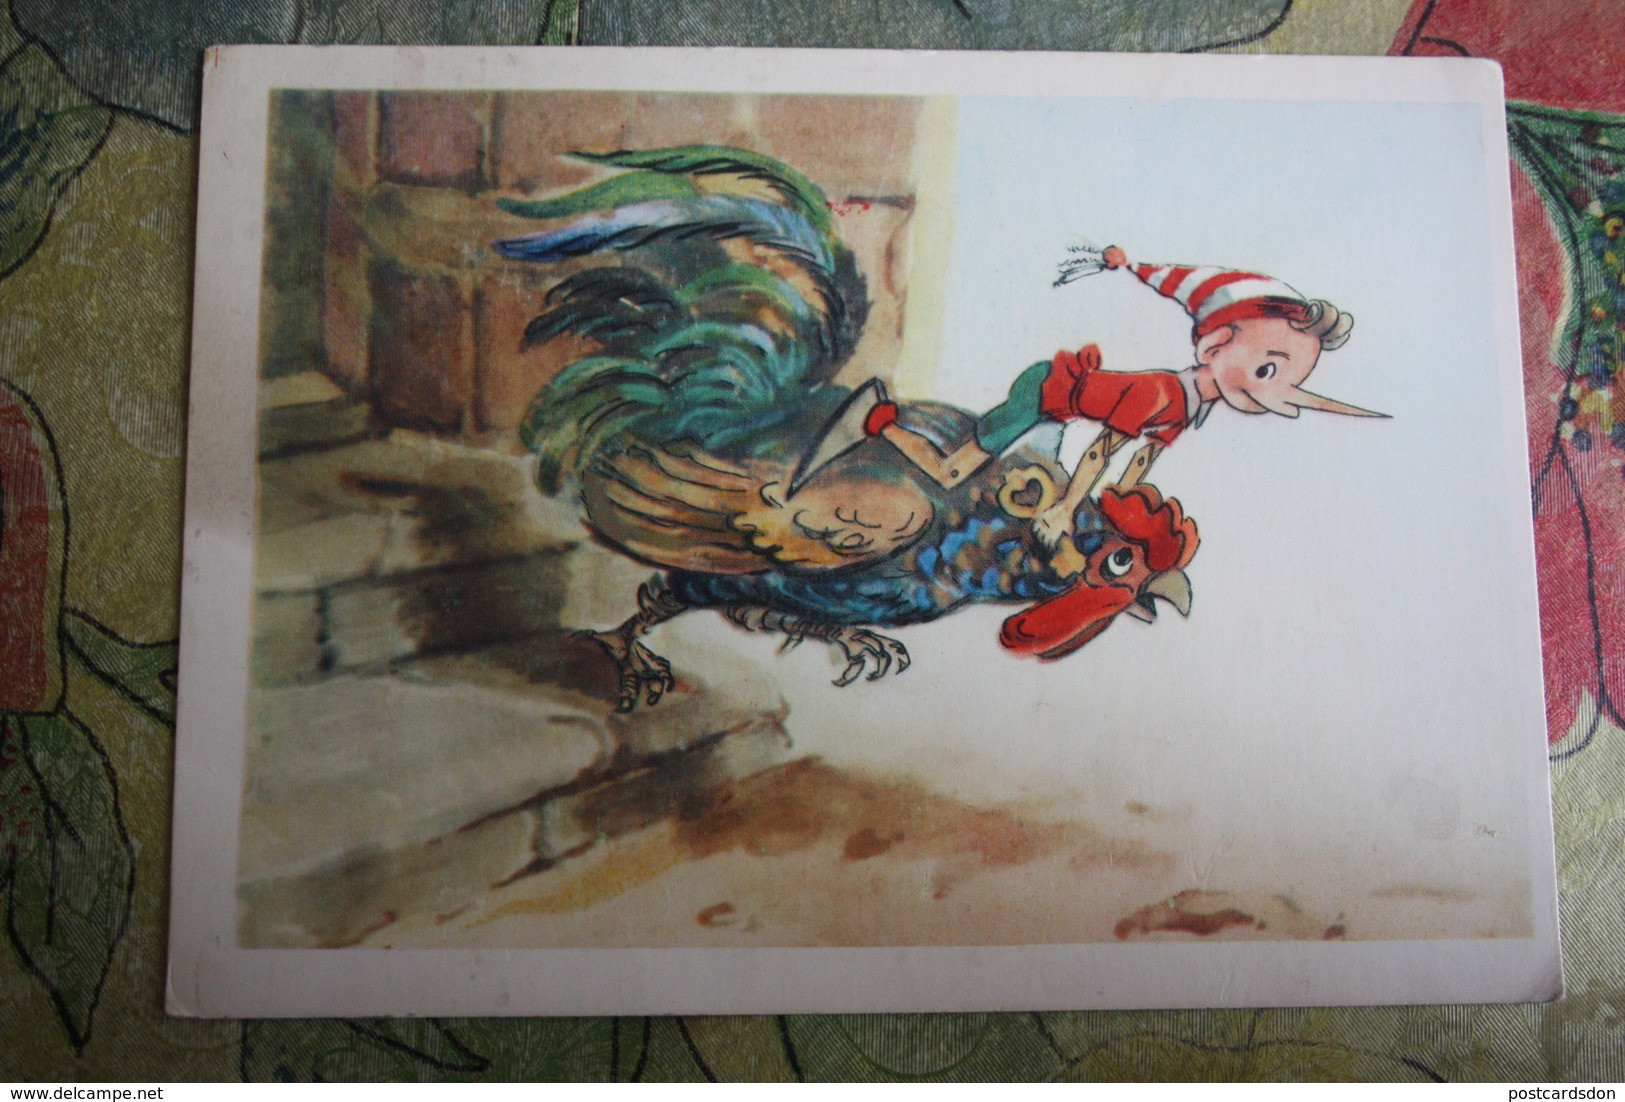 OLD USSR  PC - Fairy Tale  "Buratino " By Vladimirski - 1967  - ROOSTER / COQ / Pinocchio - Fairy Tales, Popular Stories & Legends